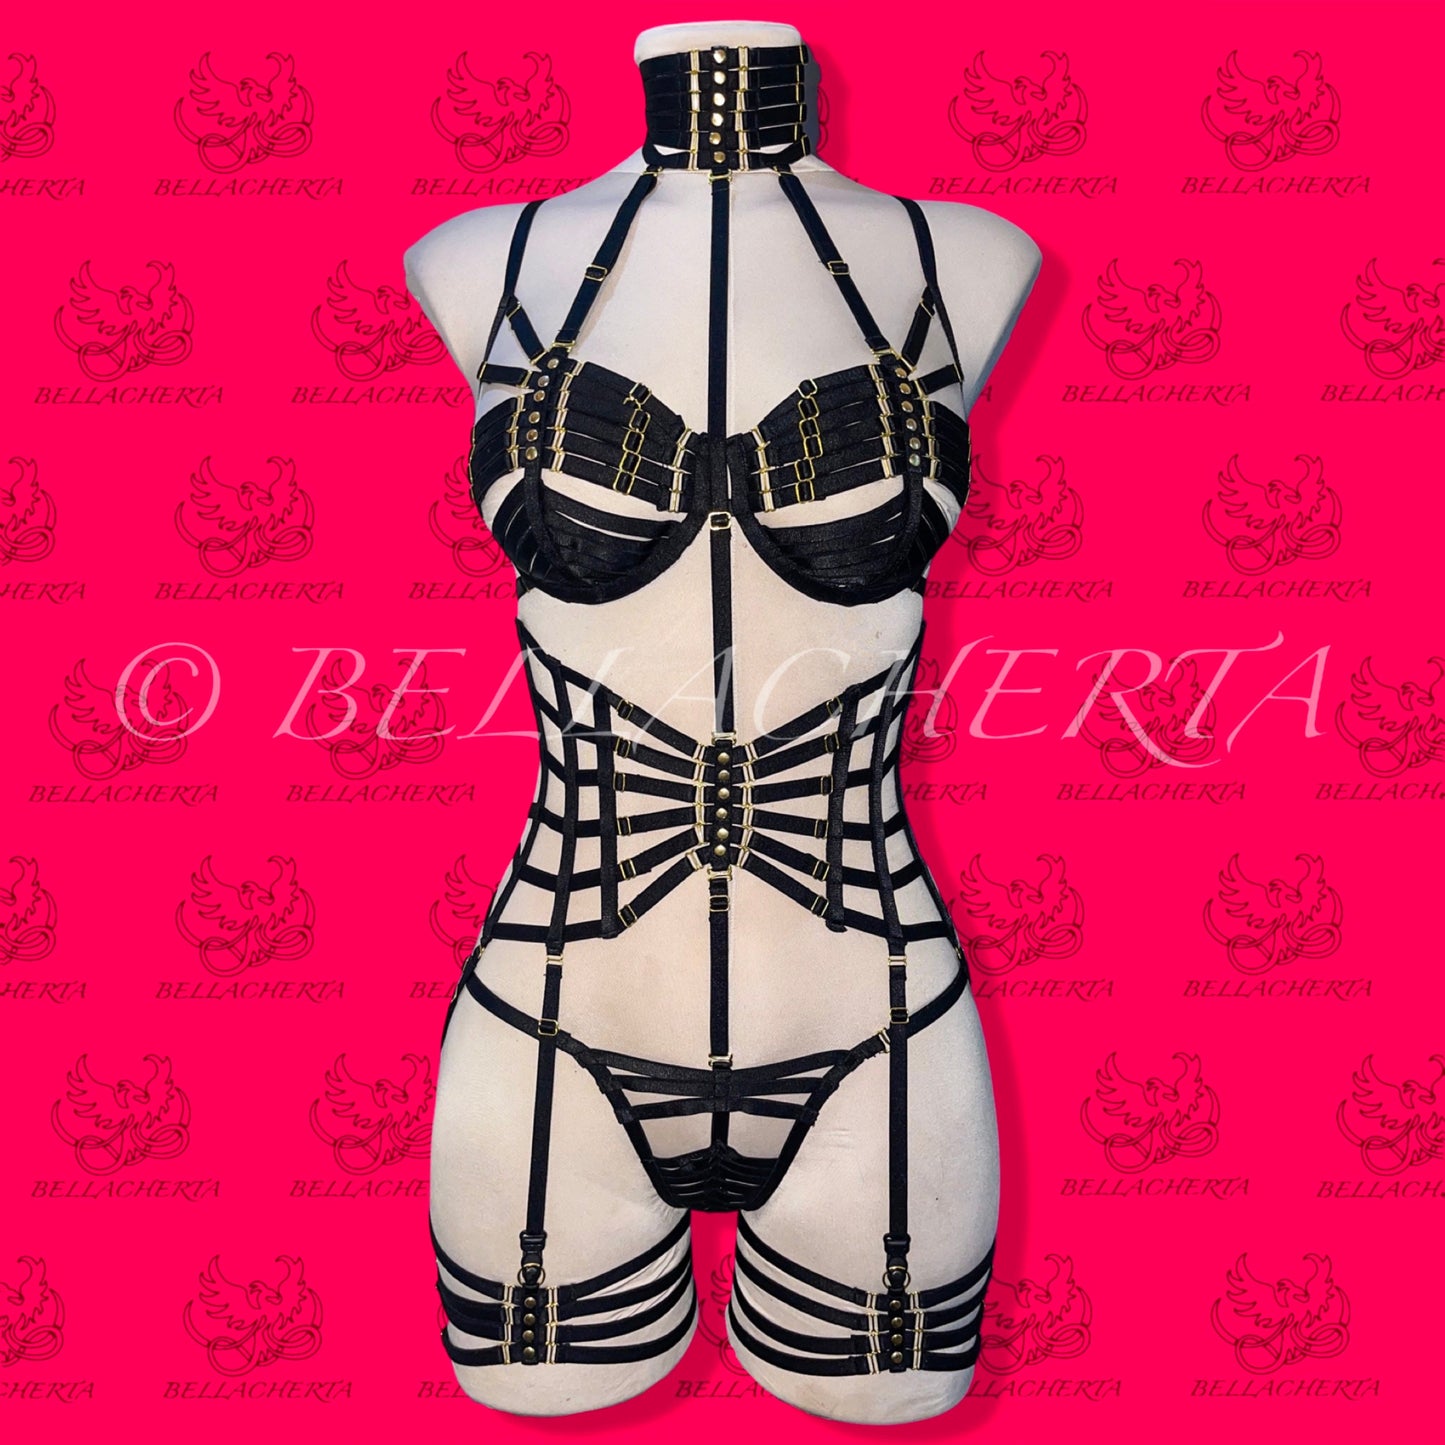 Full Body Harness Lingerie set / Strappy Bra with matching Choker, Panty, Garter Belt, and a pair of Garters